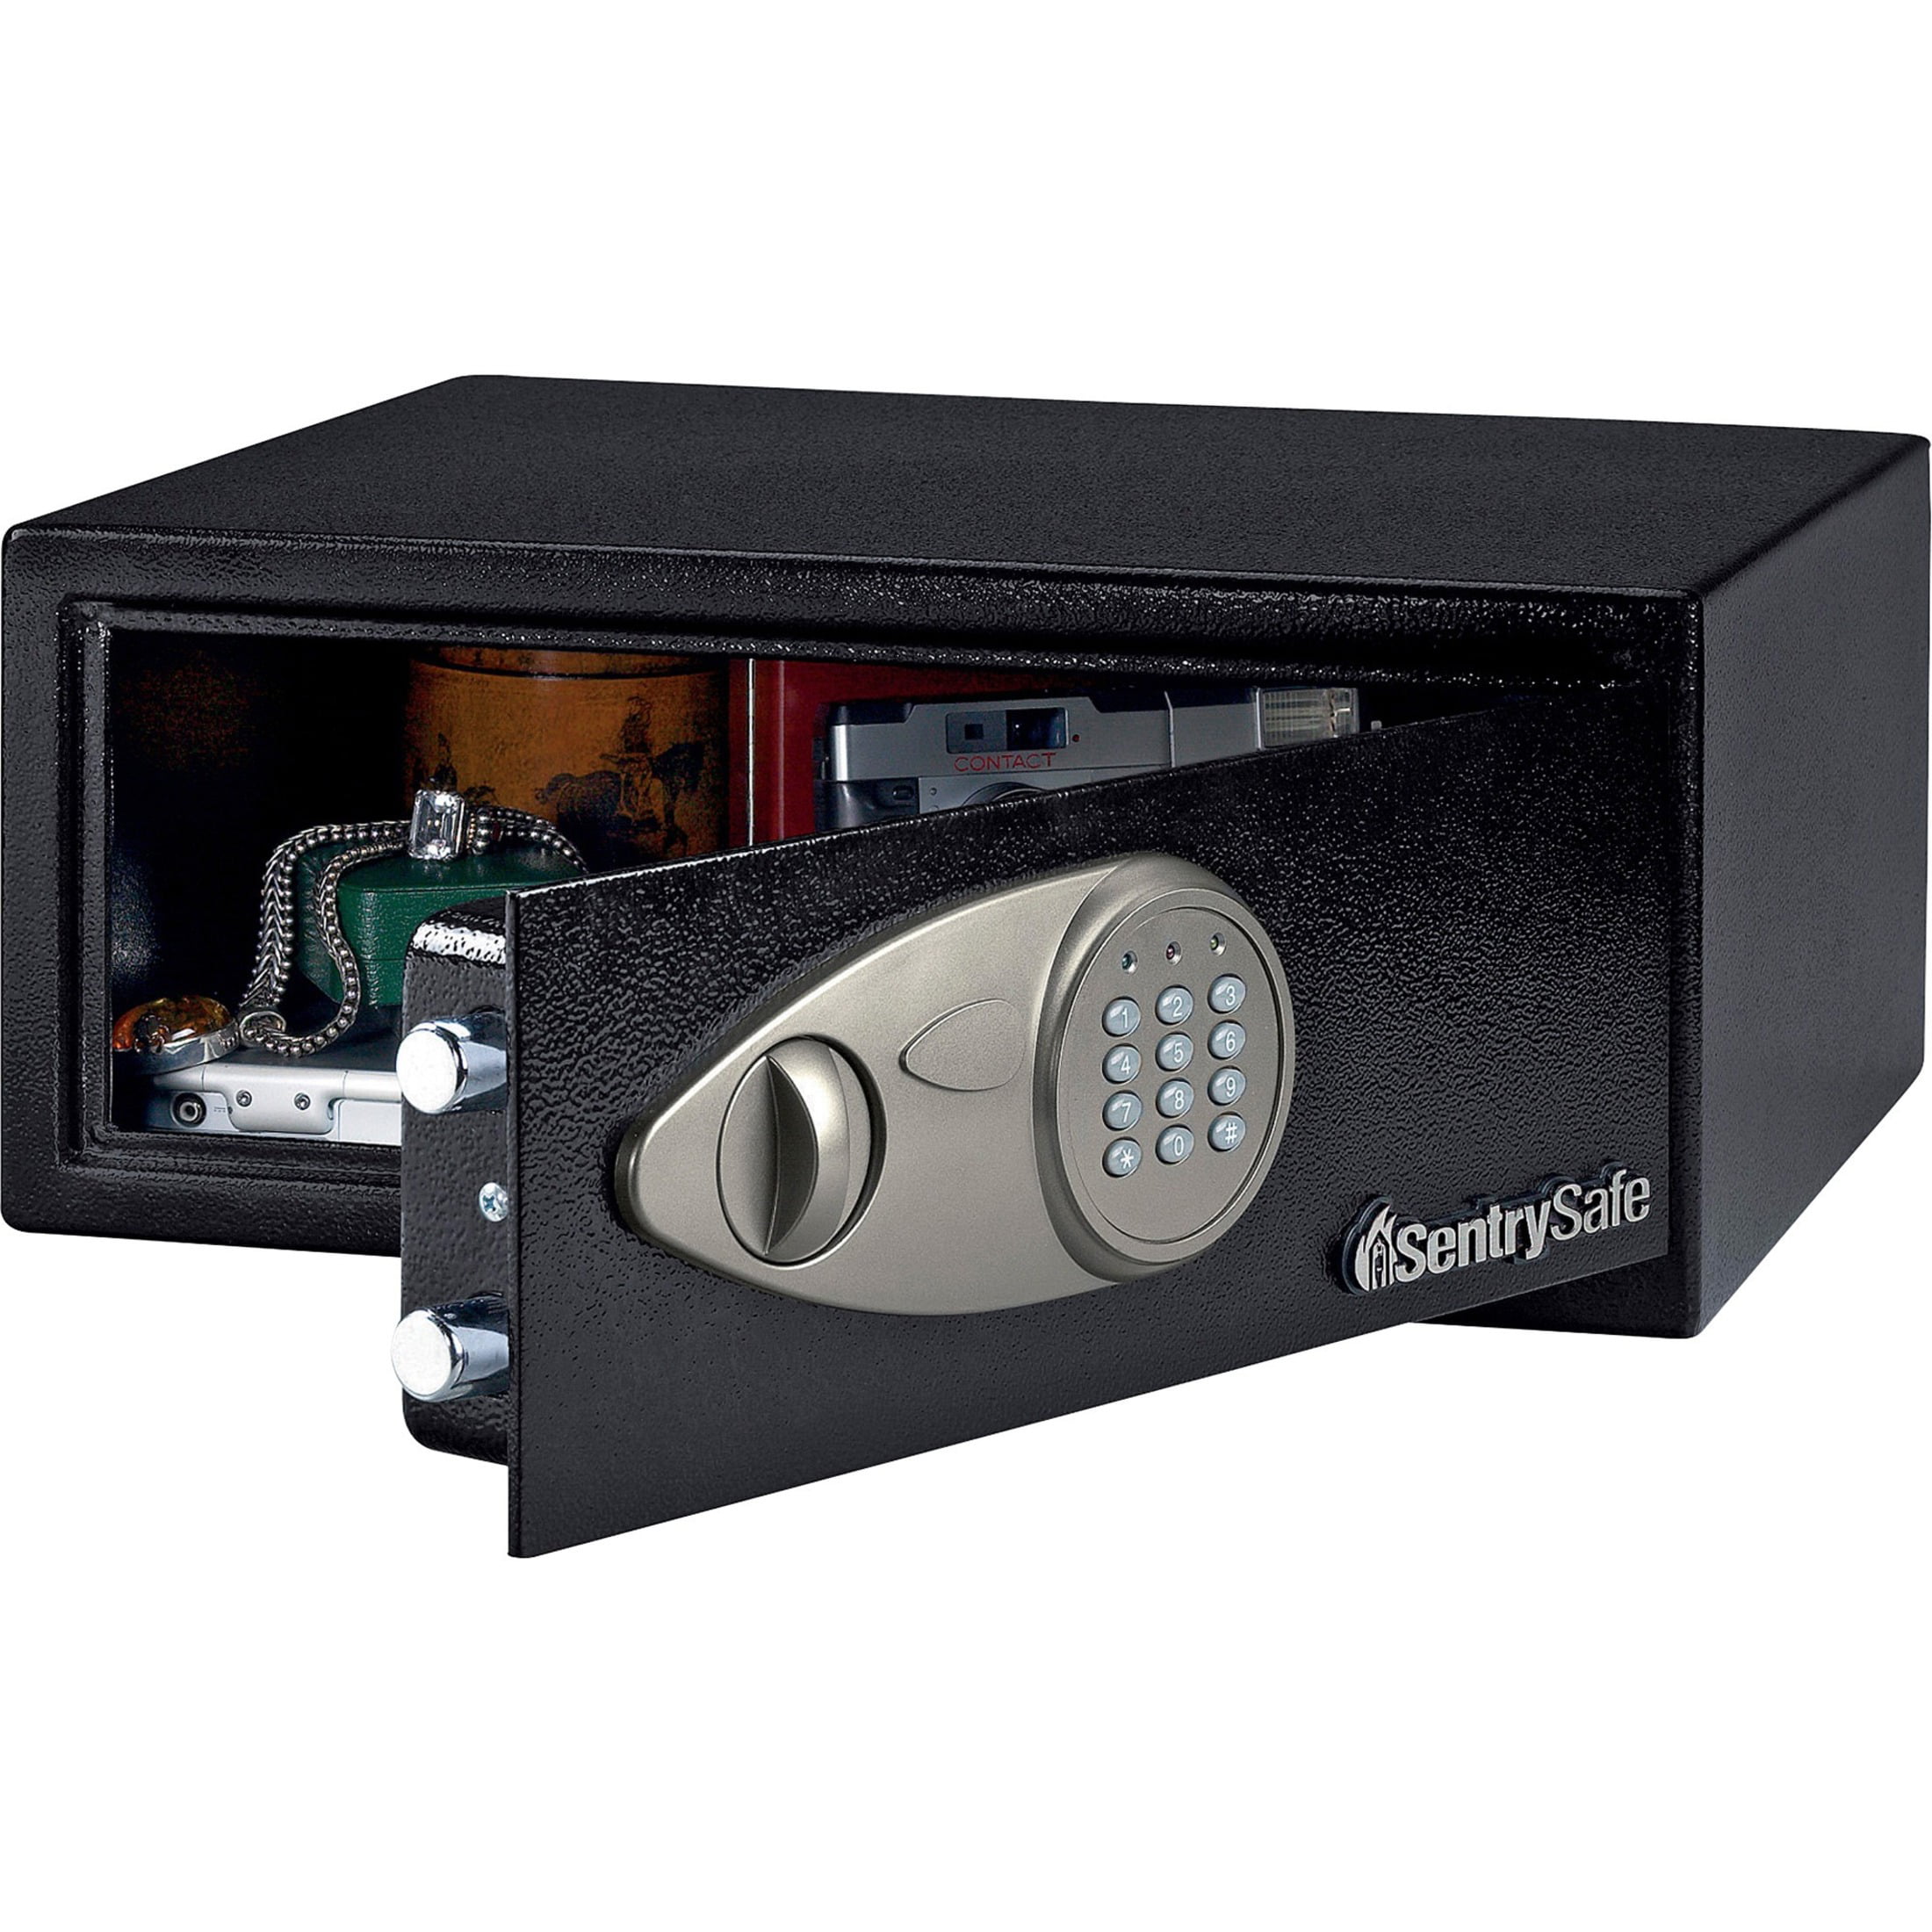 Sentry Safe .7 cu ft Security Safe with Electronic Lock